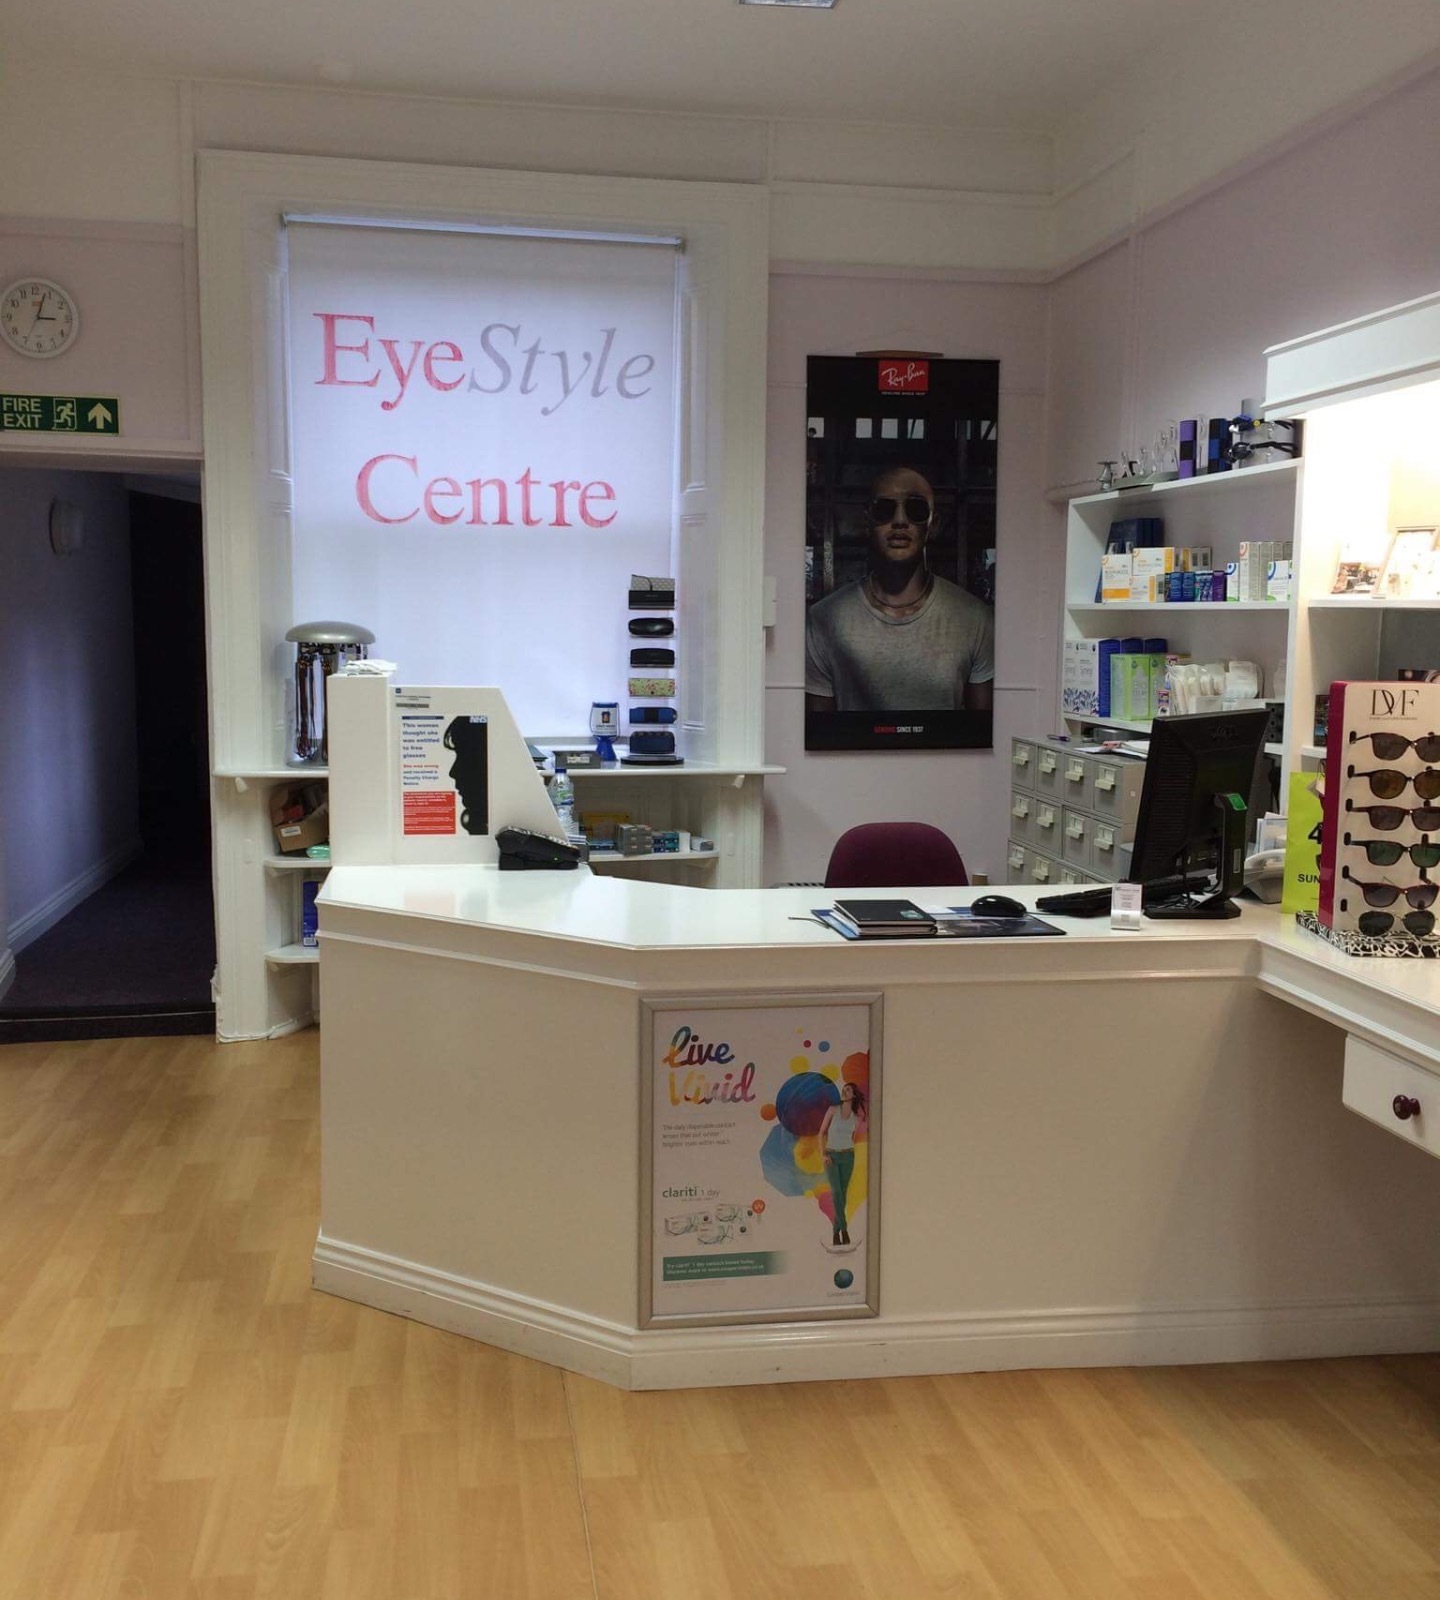 EyeStyle Centre, Shaftesbury, Dorset, Shaftesbury and Gillingham, Gold Hill, East Dorset, SP7 8AA